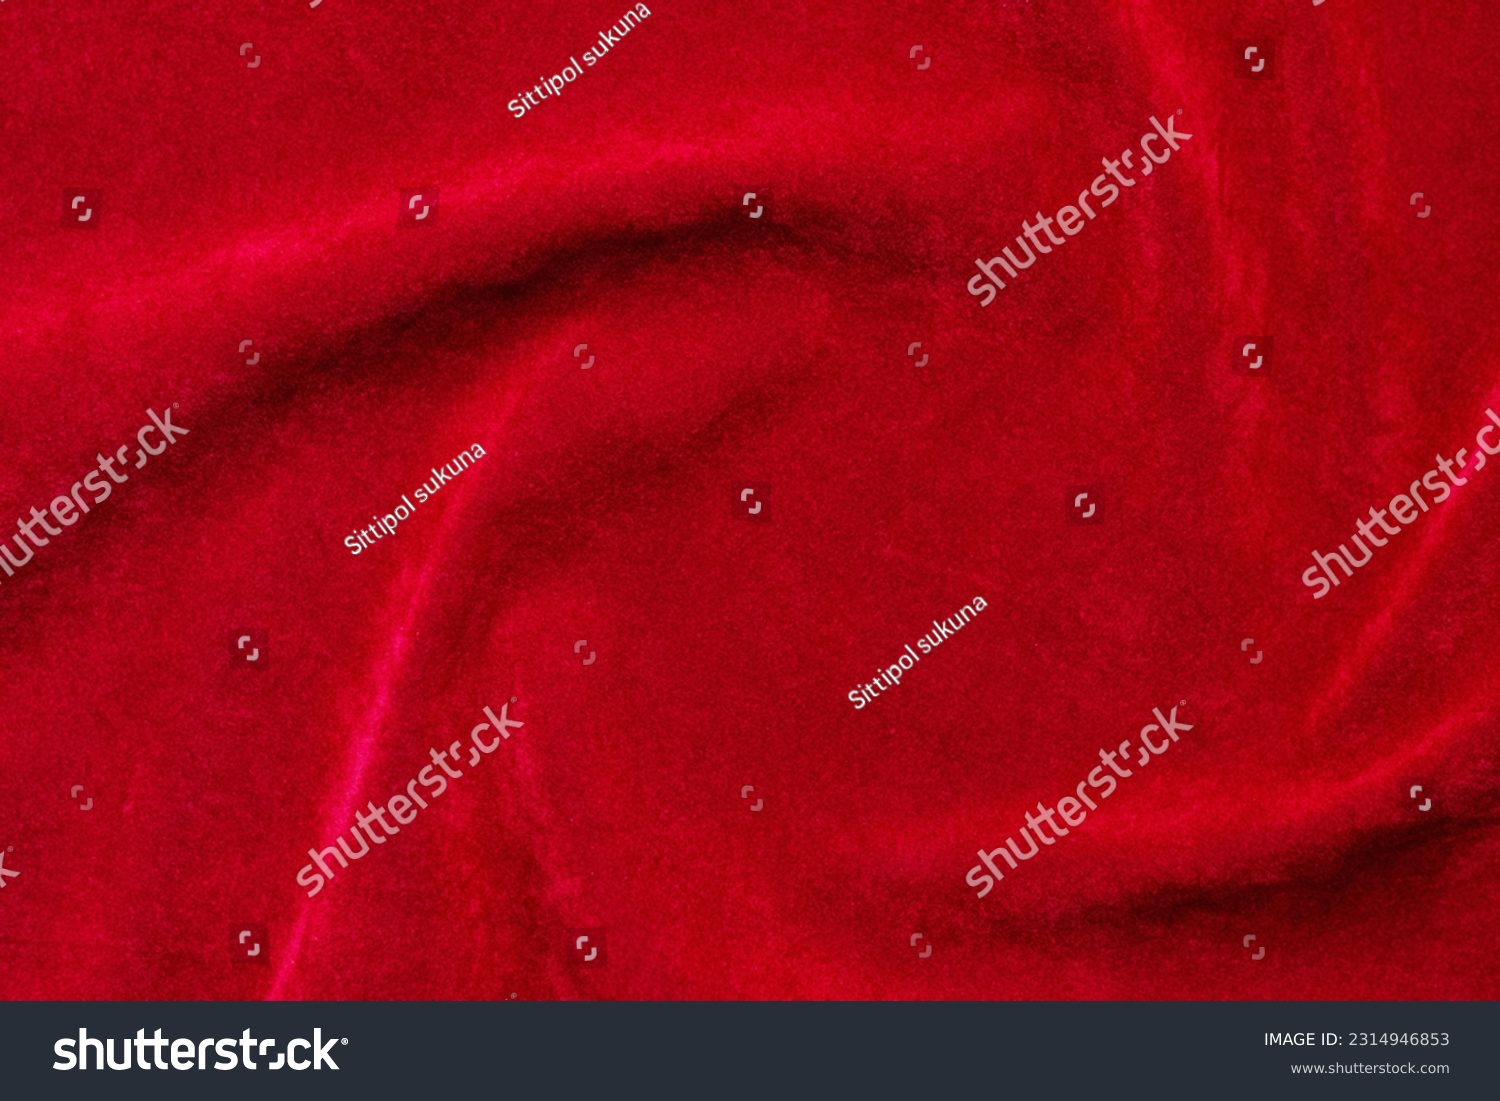 Red velvet fabric texture used as background. red fabric background of soft and smooth textile material. There is space for text.	 #2314946853